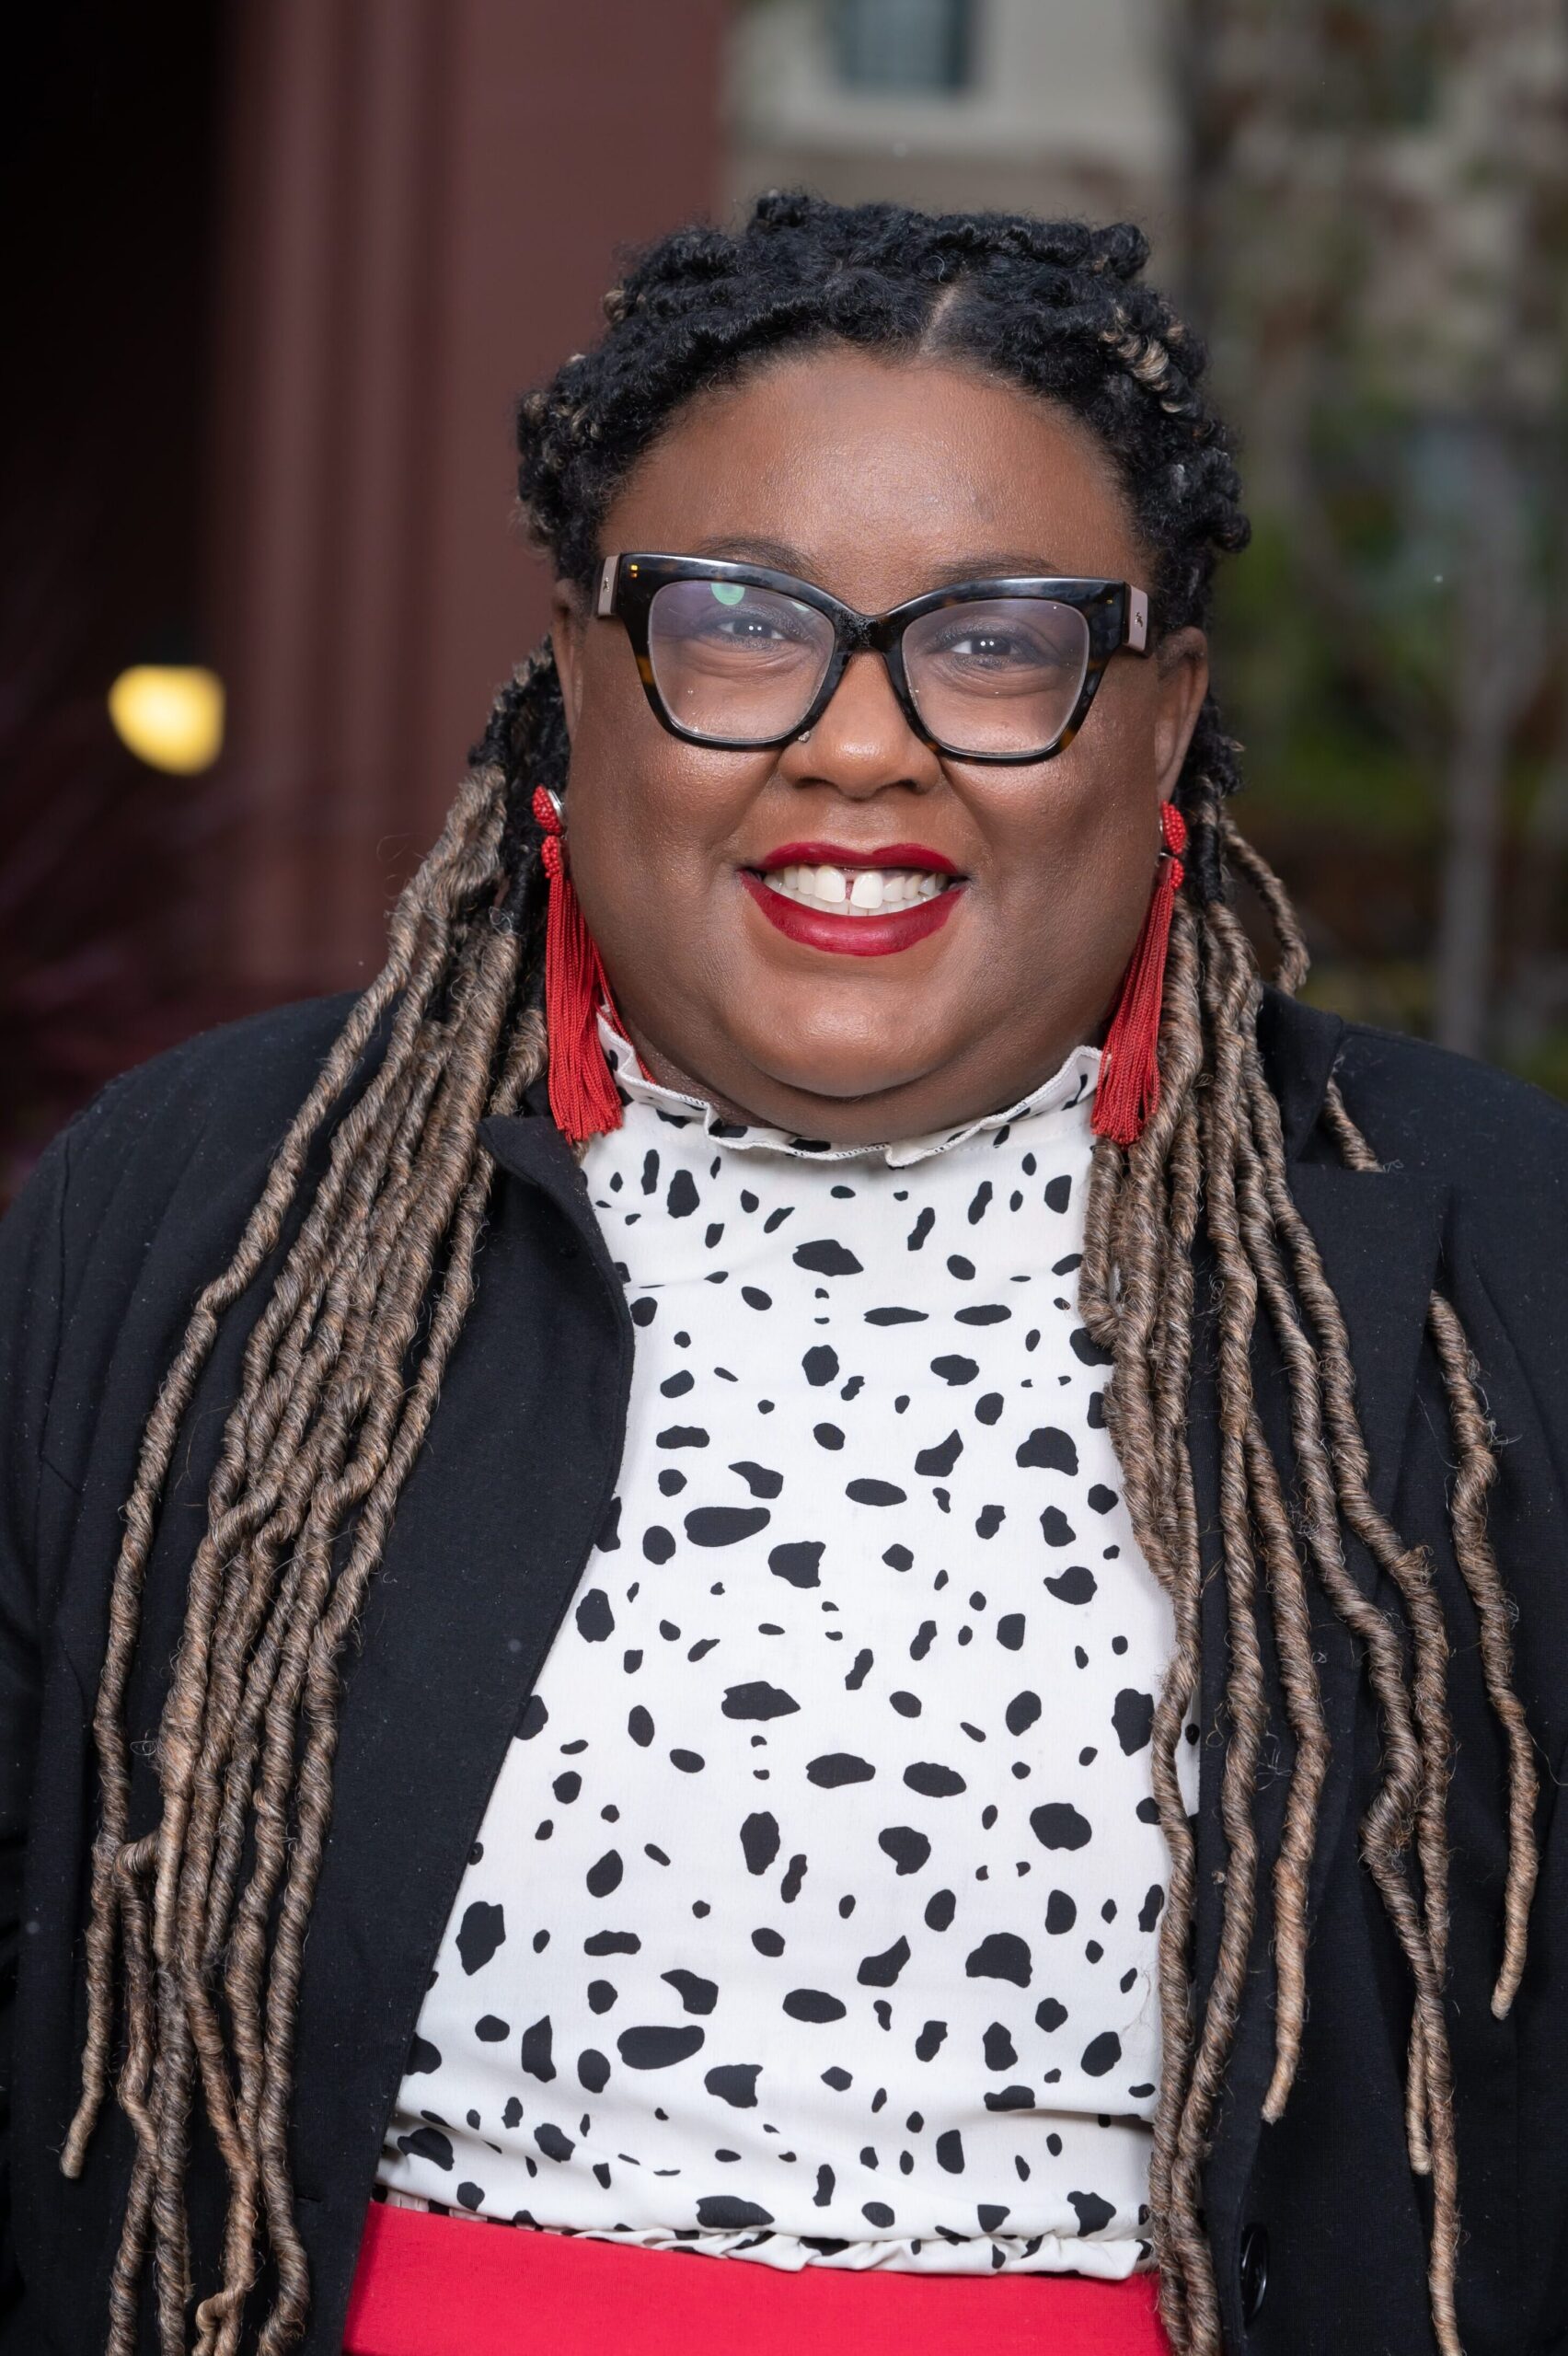 Ronnie Boyd smiles at the camera. She is a Black woman wearing thick-rimmed black glasses, bright red lipstick, and red earrings. Her hair is styled in braids.